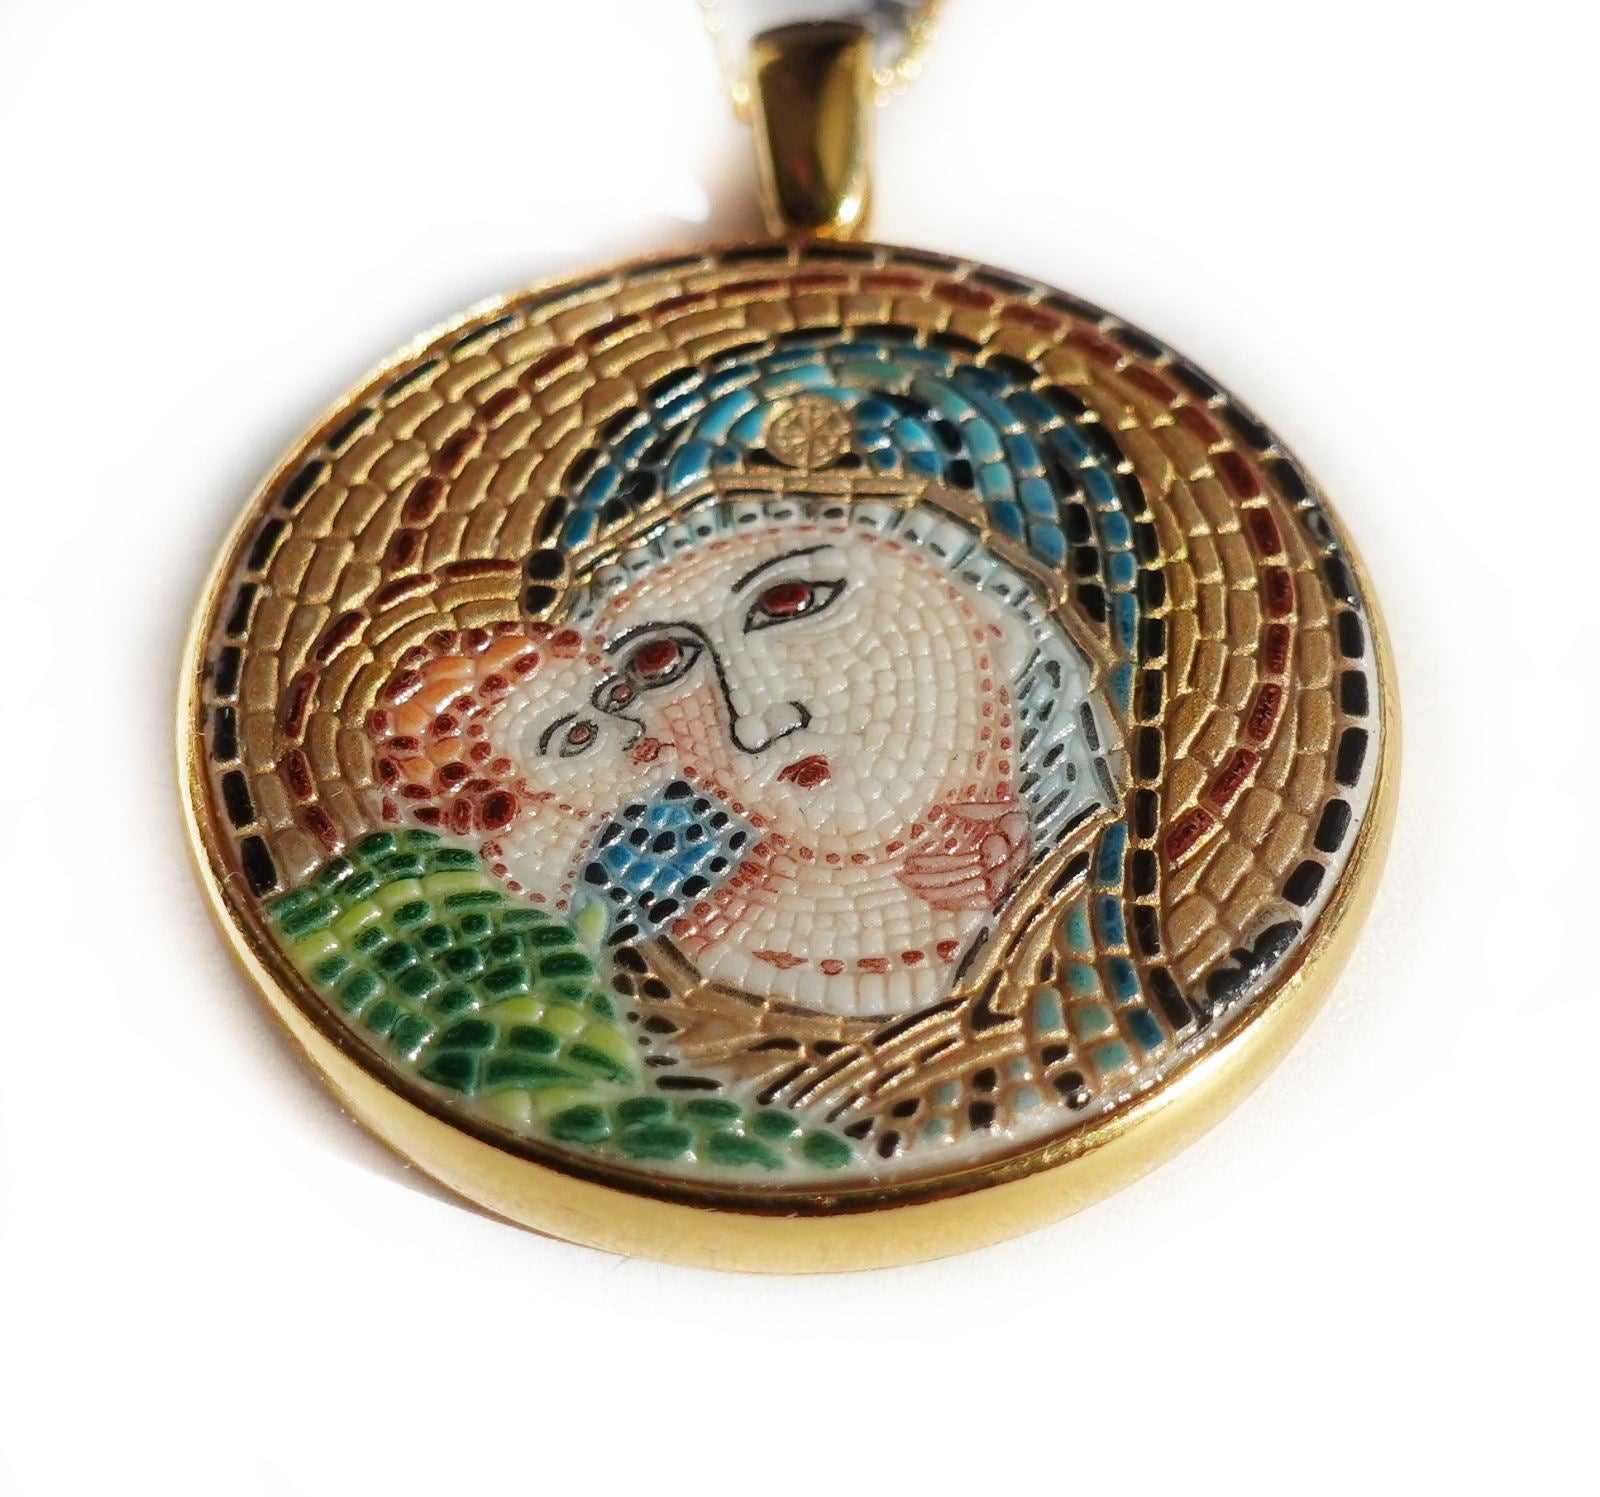 Mother Mary and Baby Jesus micro mosaic pendant in solid 14K Gold